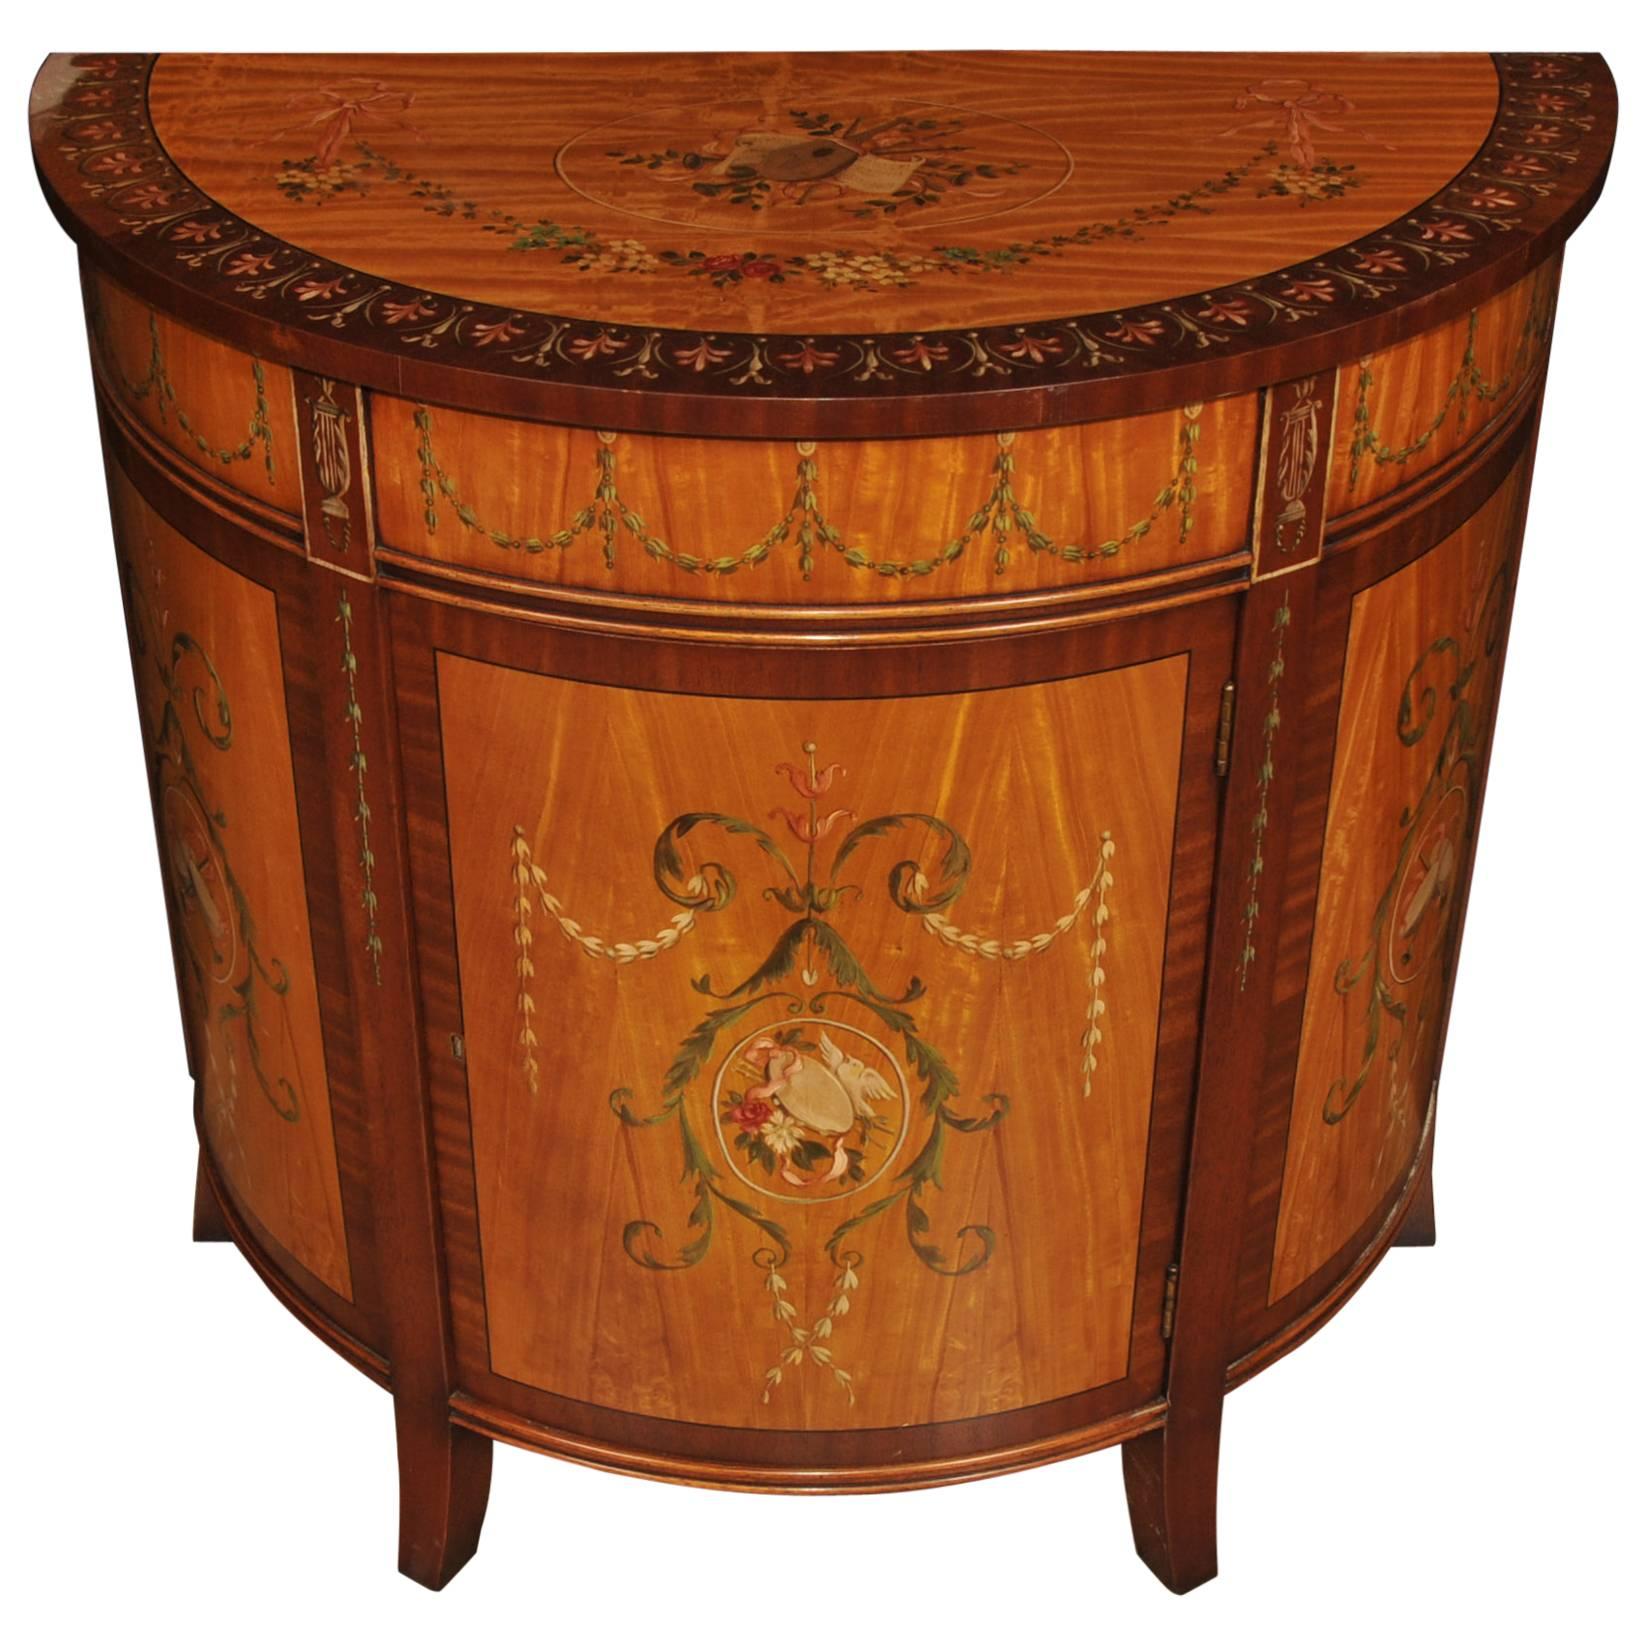 Sheraton Style Painted Demilune Cabinet Regency Satinwood Furniture For Sale